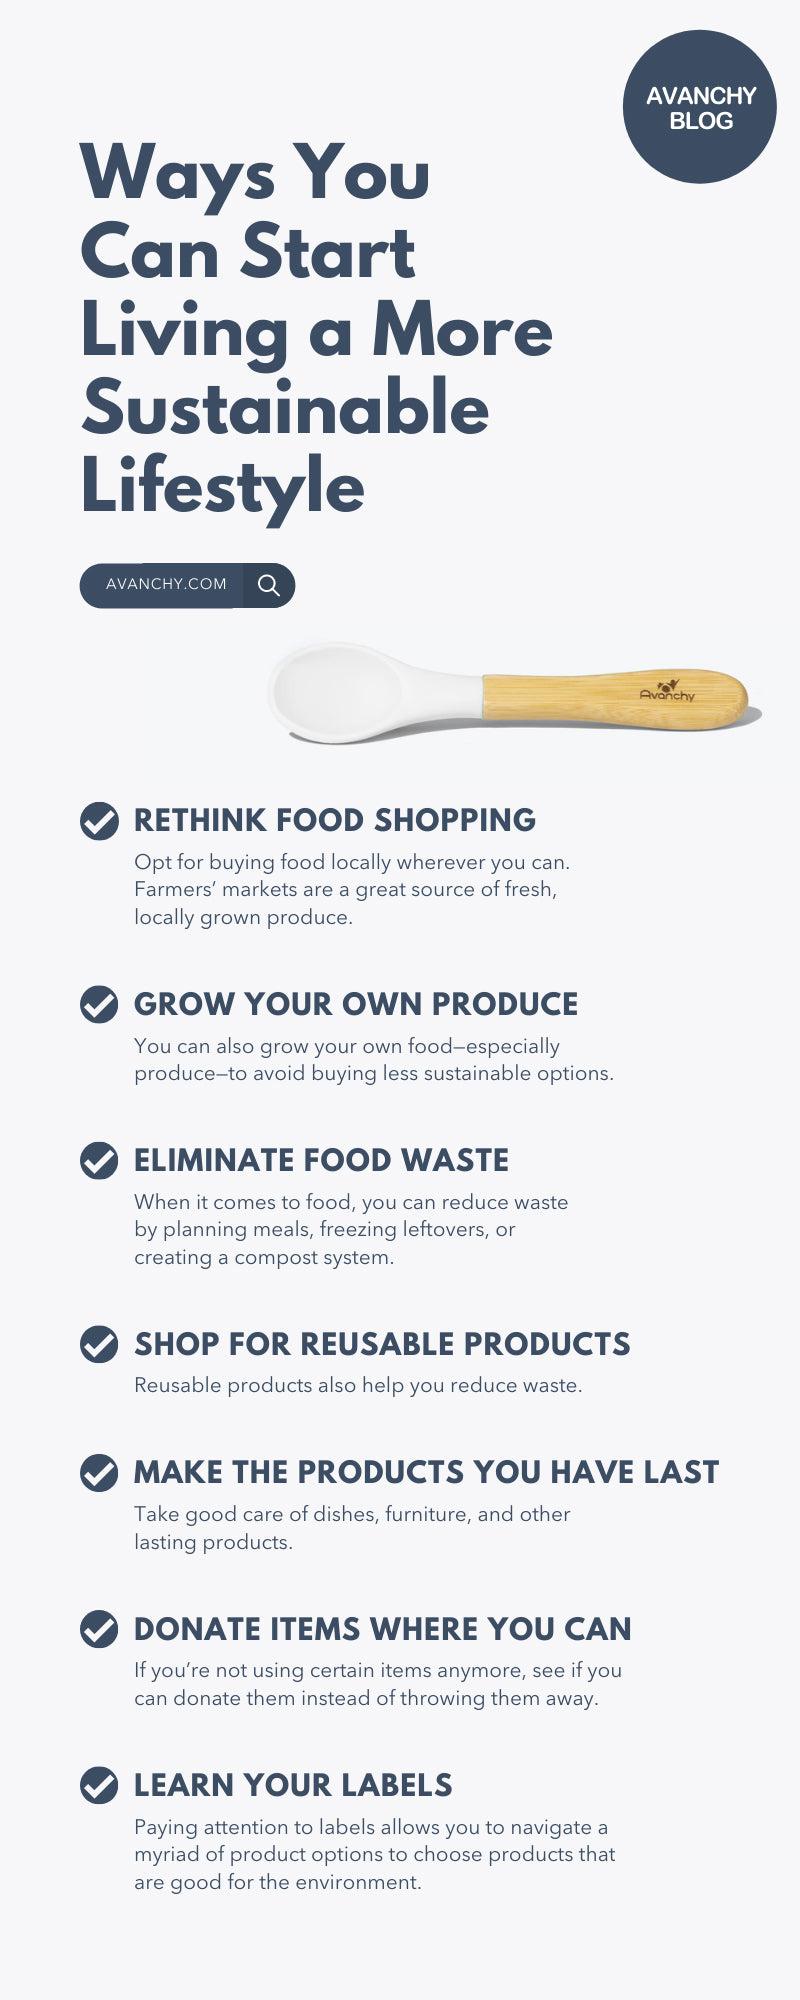 Ways You Can Start Living a More Sustainable Lifestyle